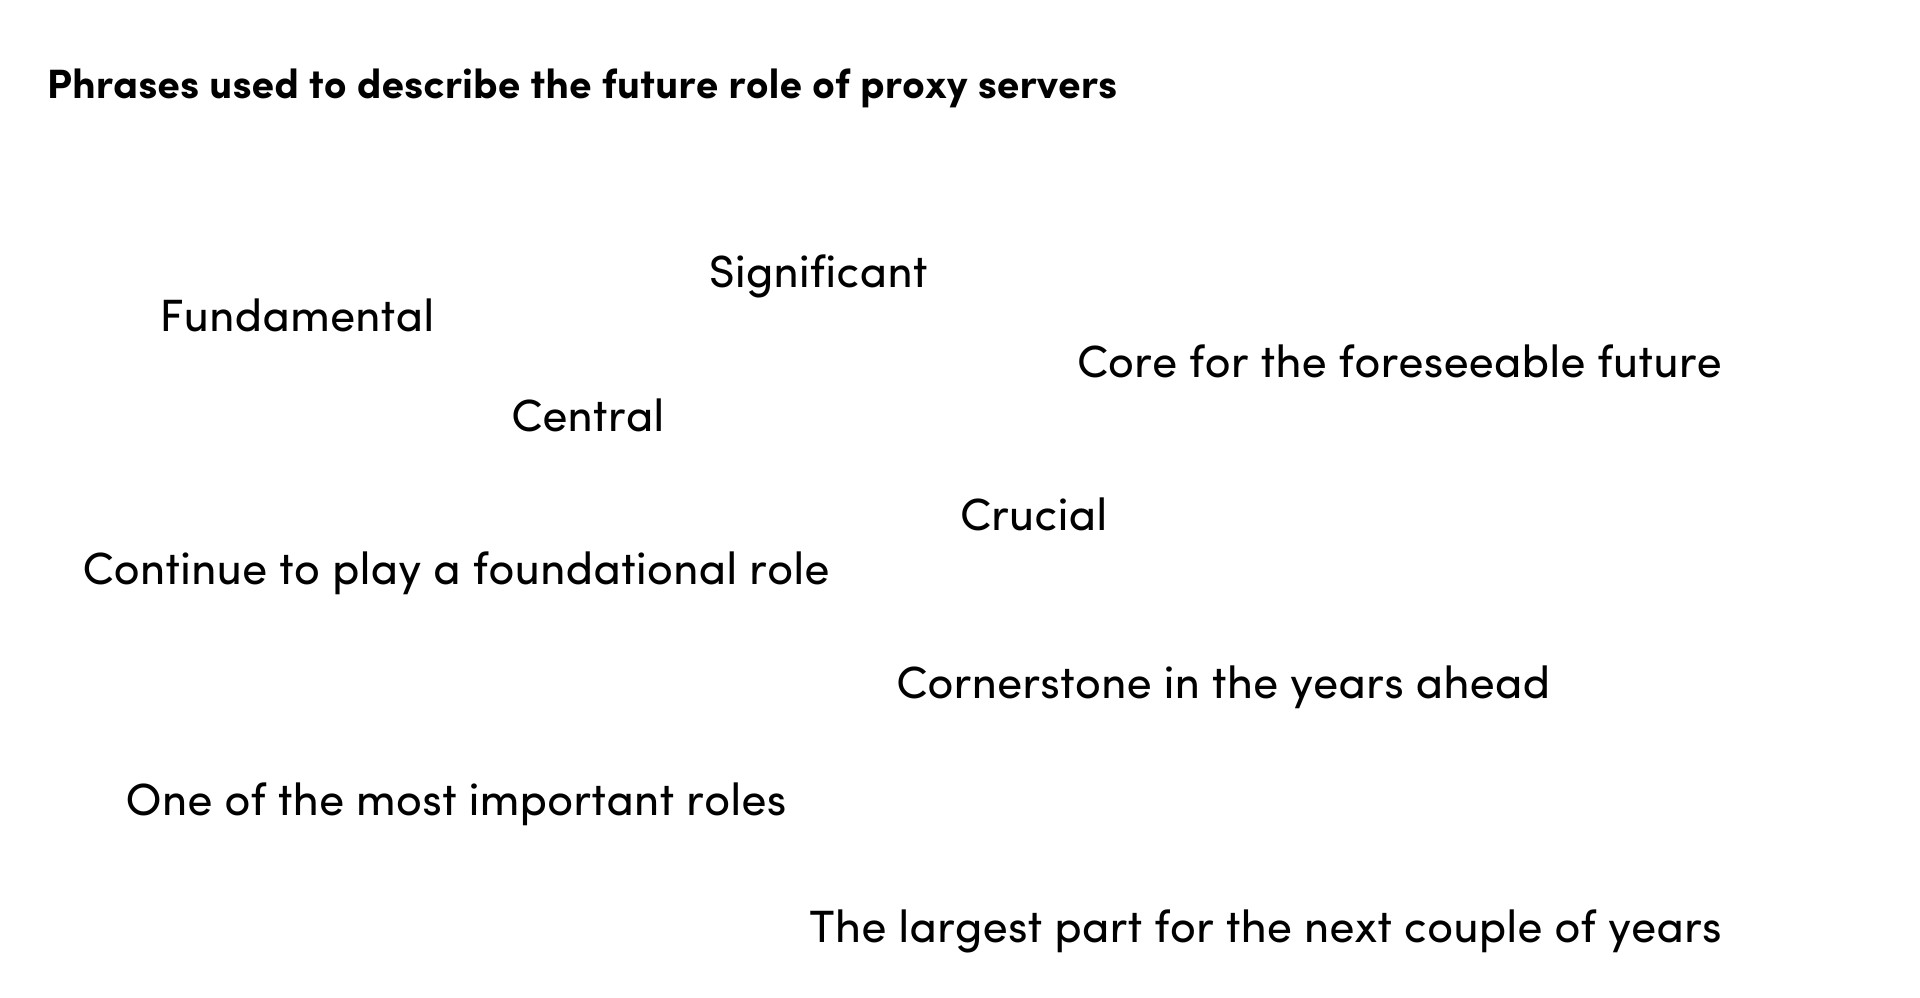 the future role of proxy servers